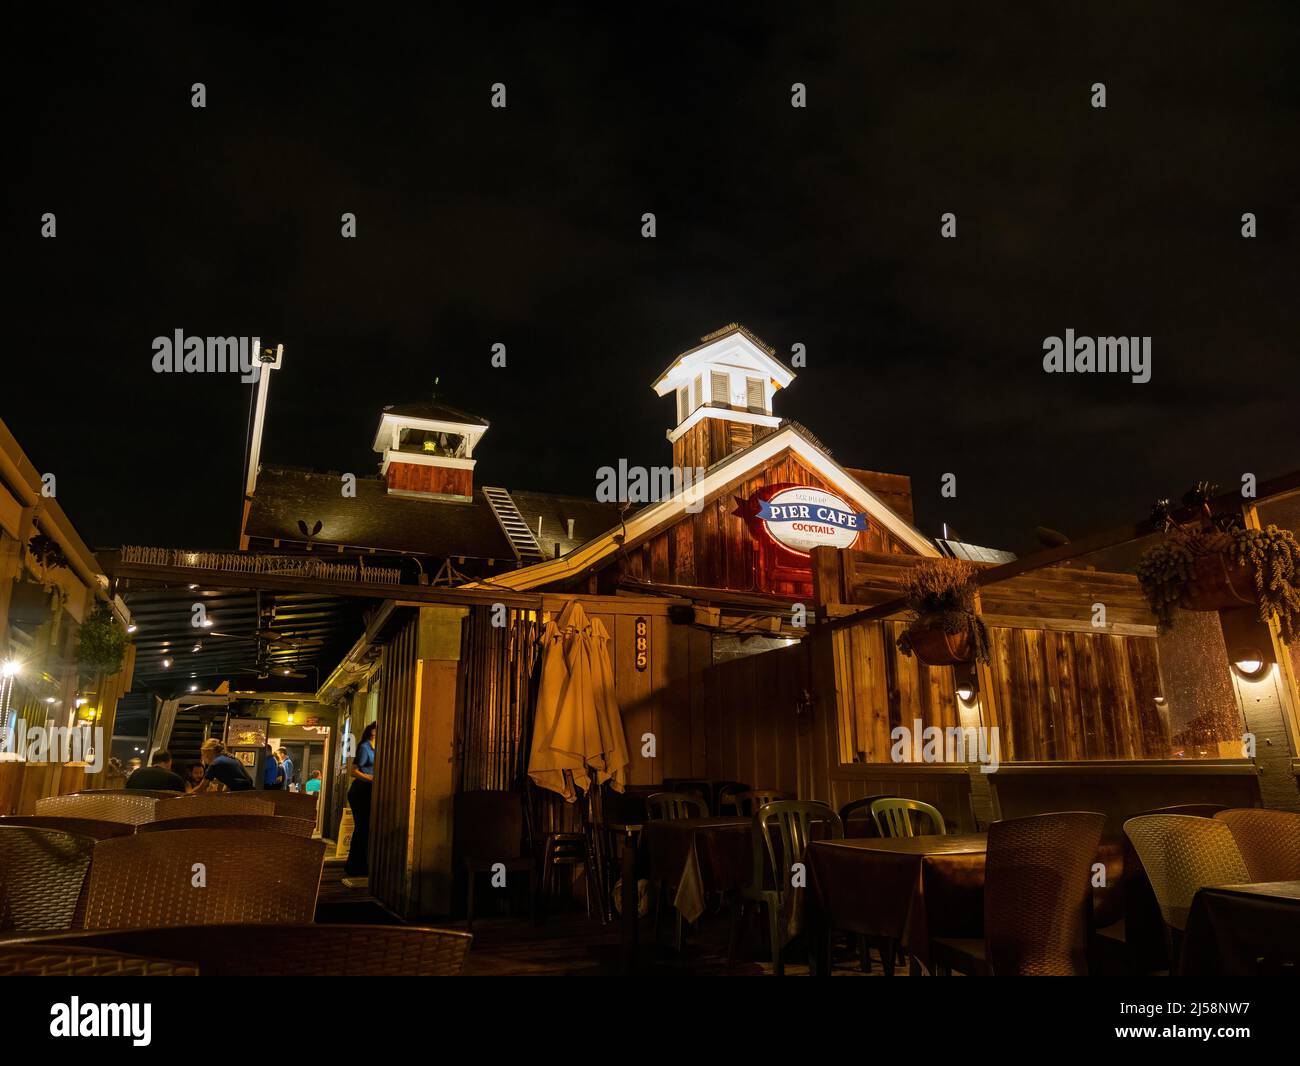 San Diego, AUG 2 2014 - Night exterior view of the Pier cafe in Seaport Village Stock Photo